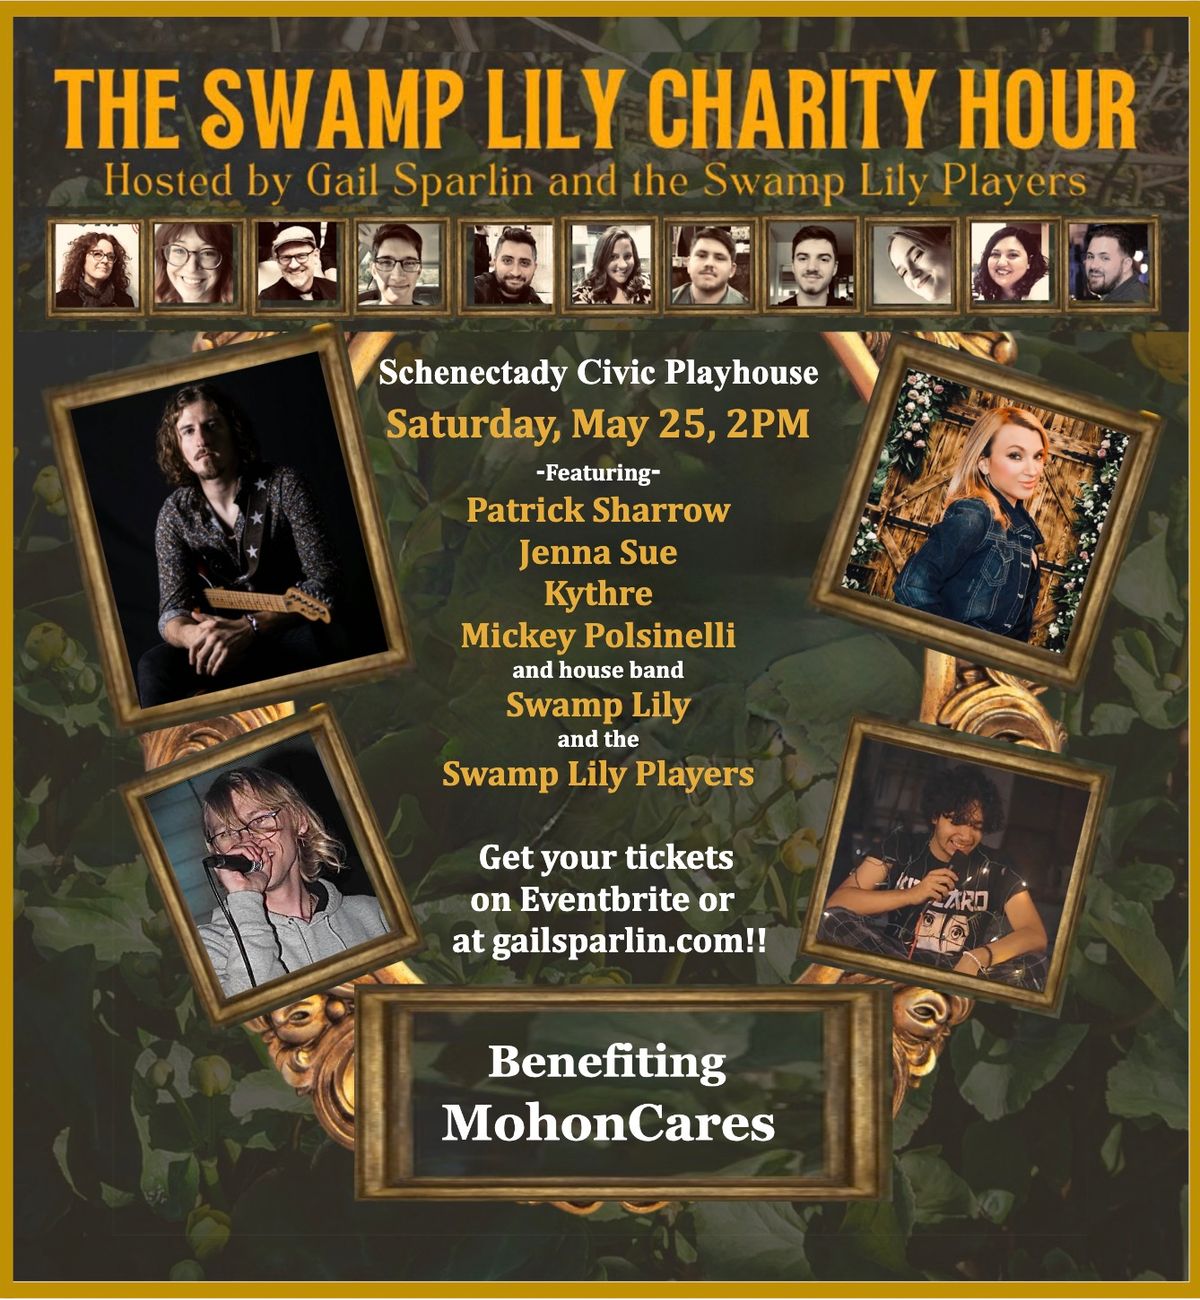 Swamp Lily Charity Hour